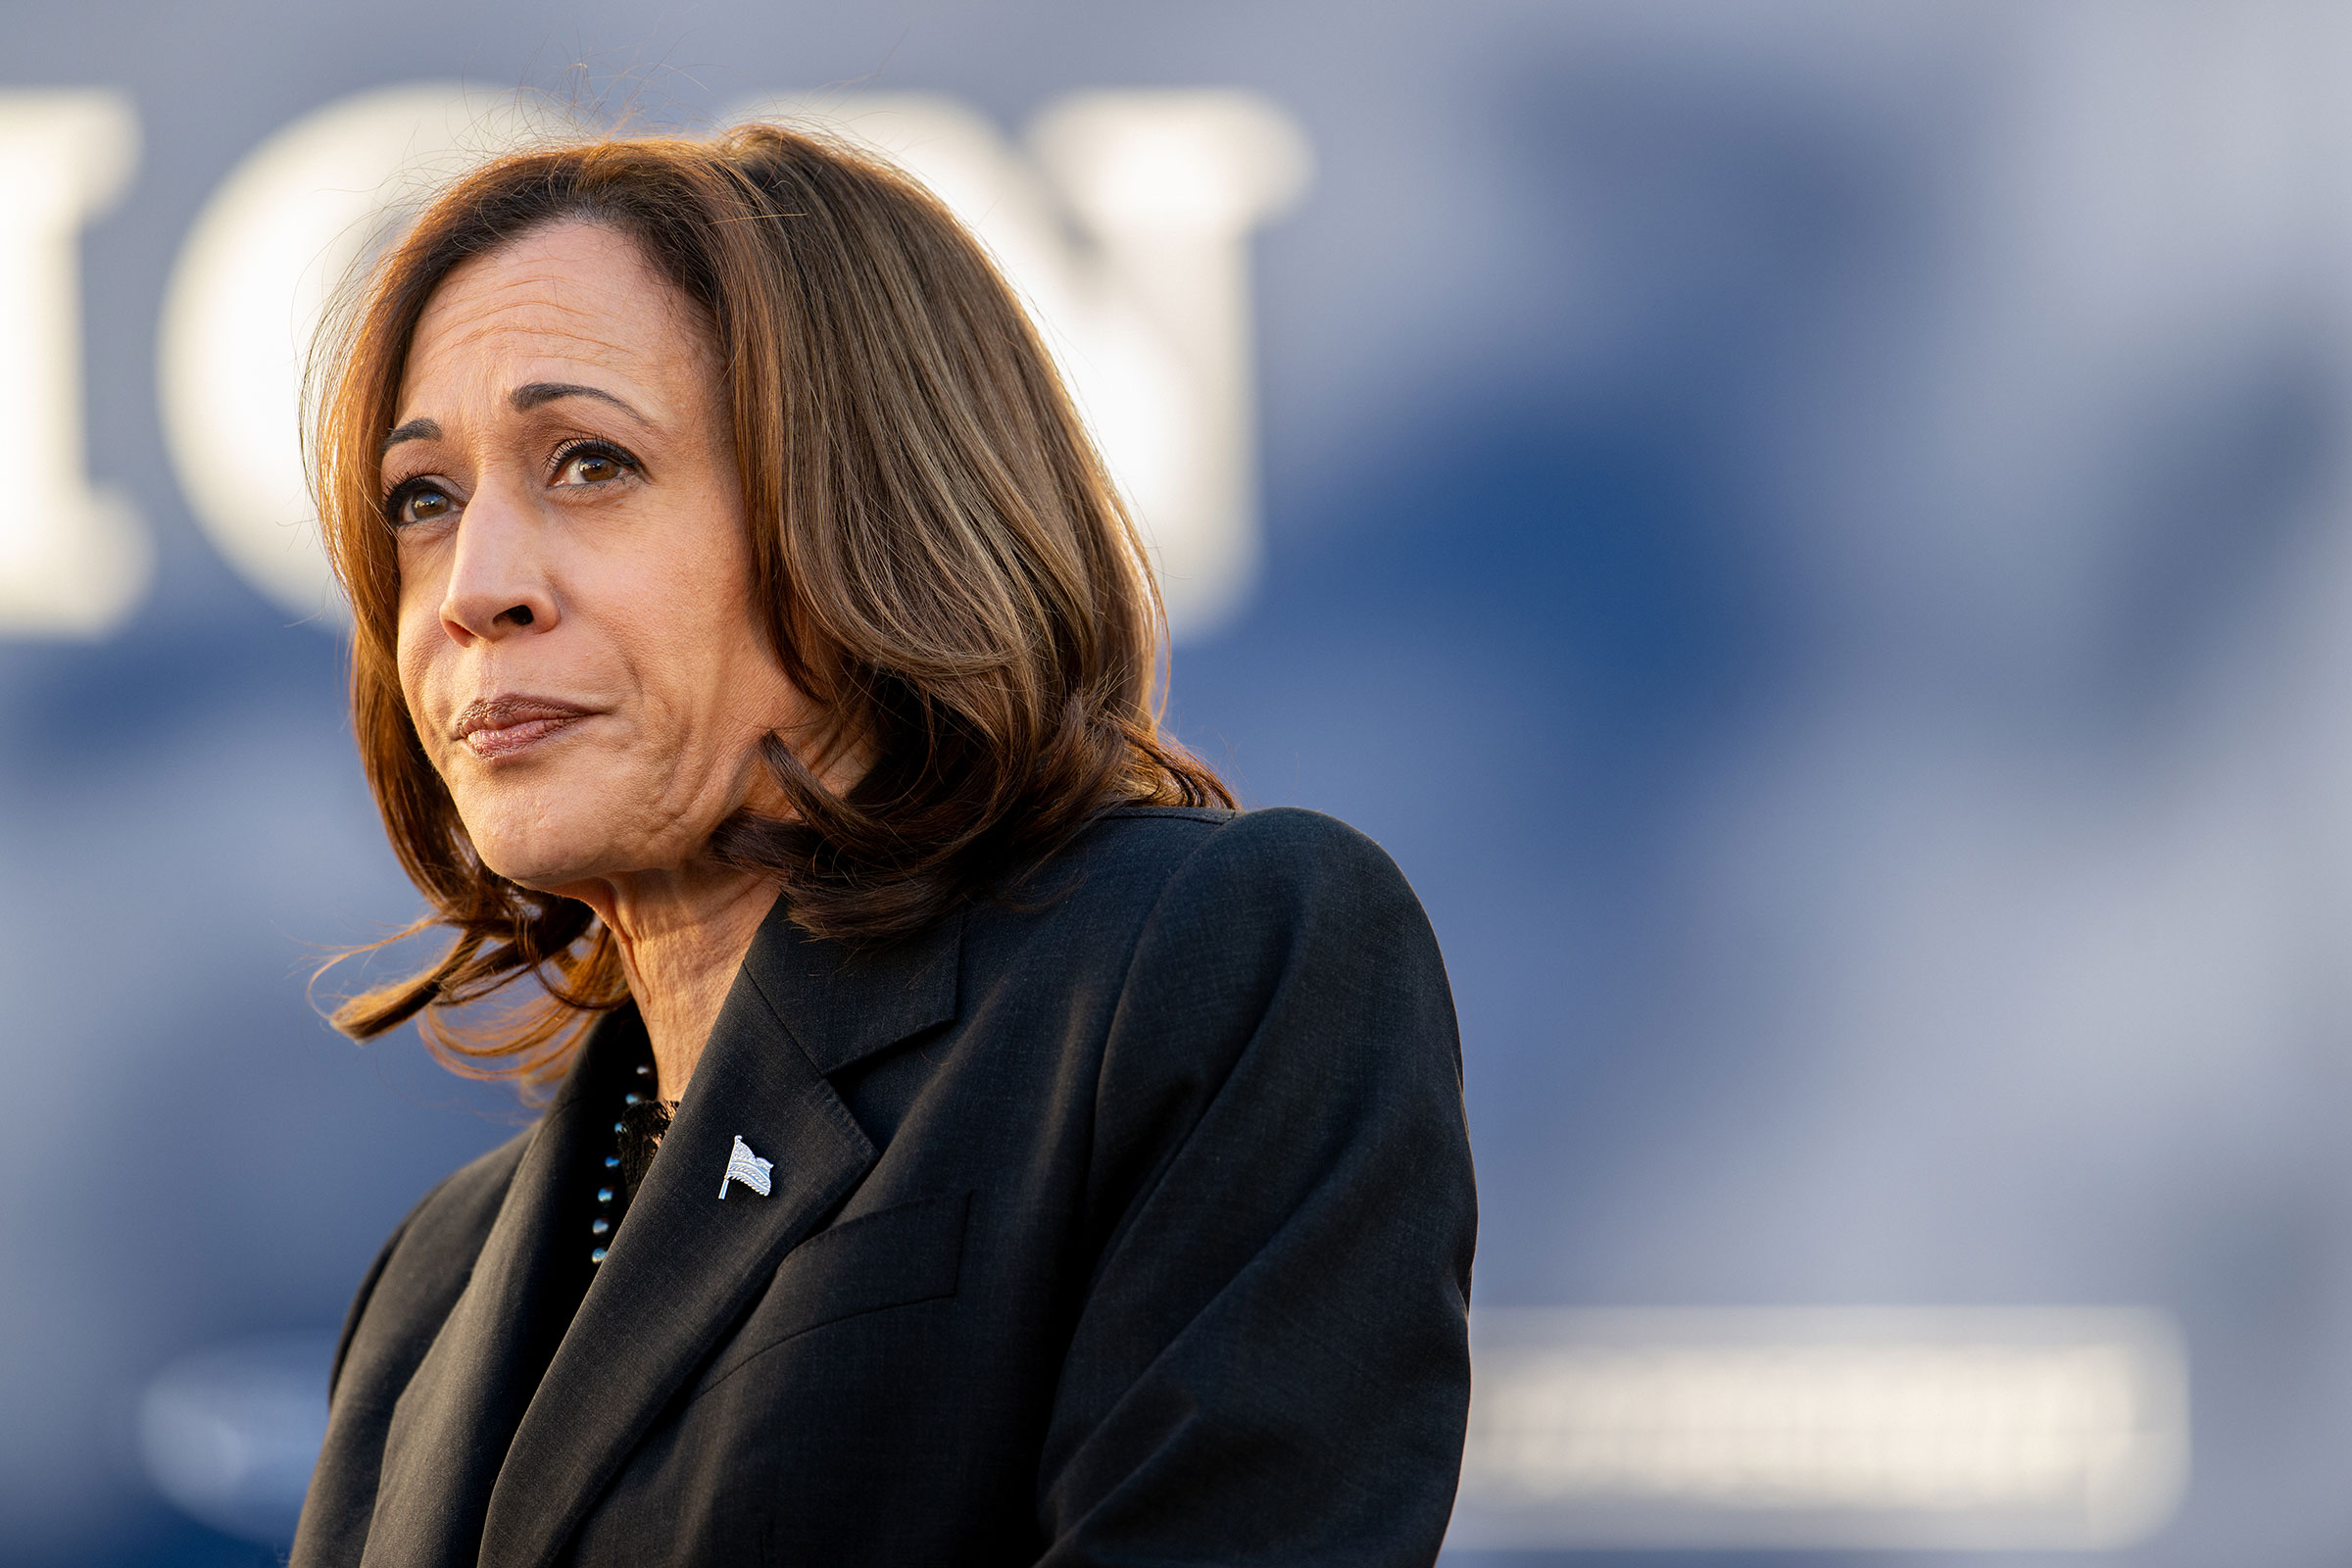 US Vice President Kamala Harris speaks during a 'First In The Nation' campaign rally at South Carolina State University on February 2 in Orangeburg, South Carolina.